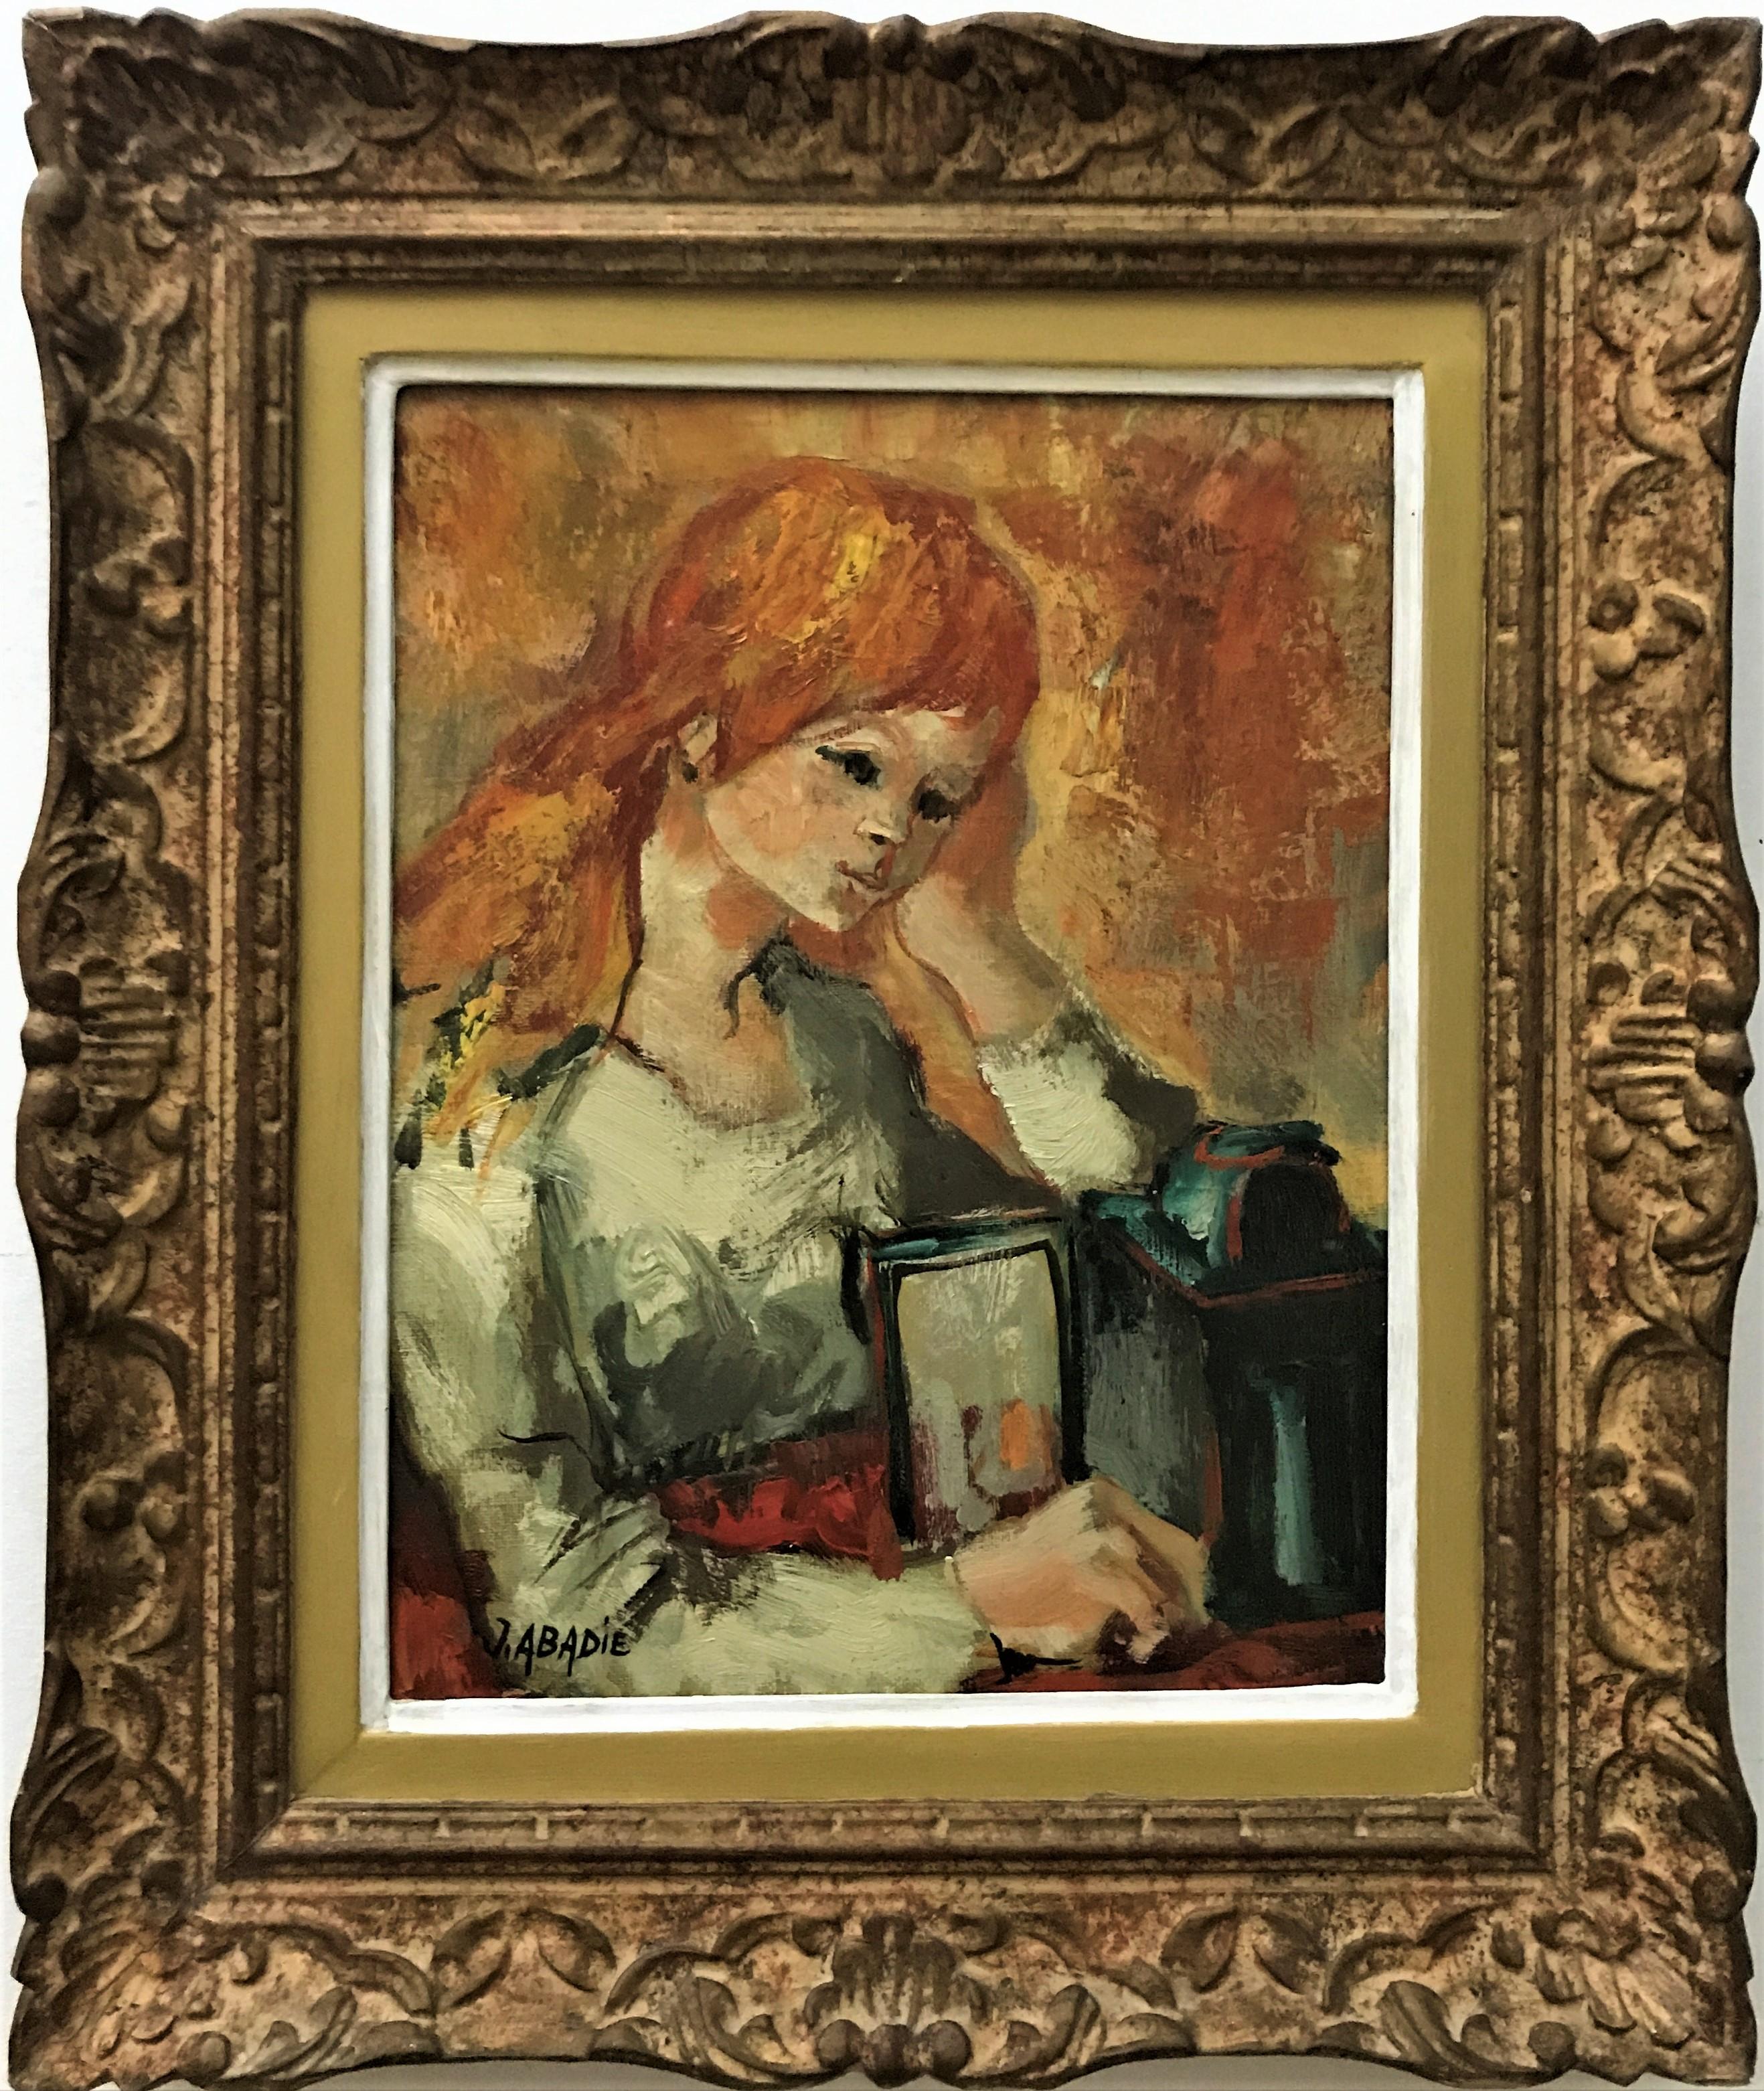 Woman with the Lamp, original oil on canvass, 20th C post-impressionist, signed - Painting by Jean Abadie